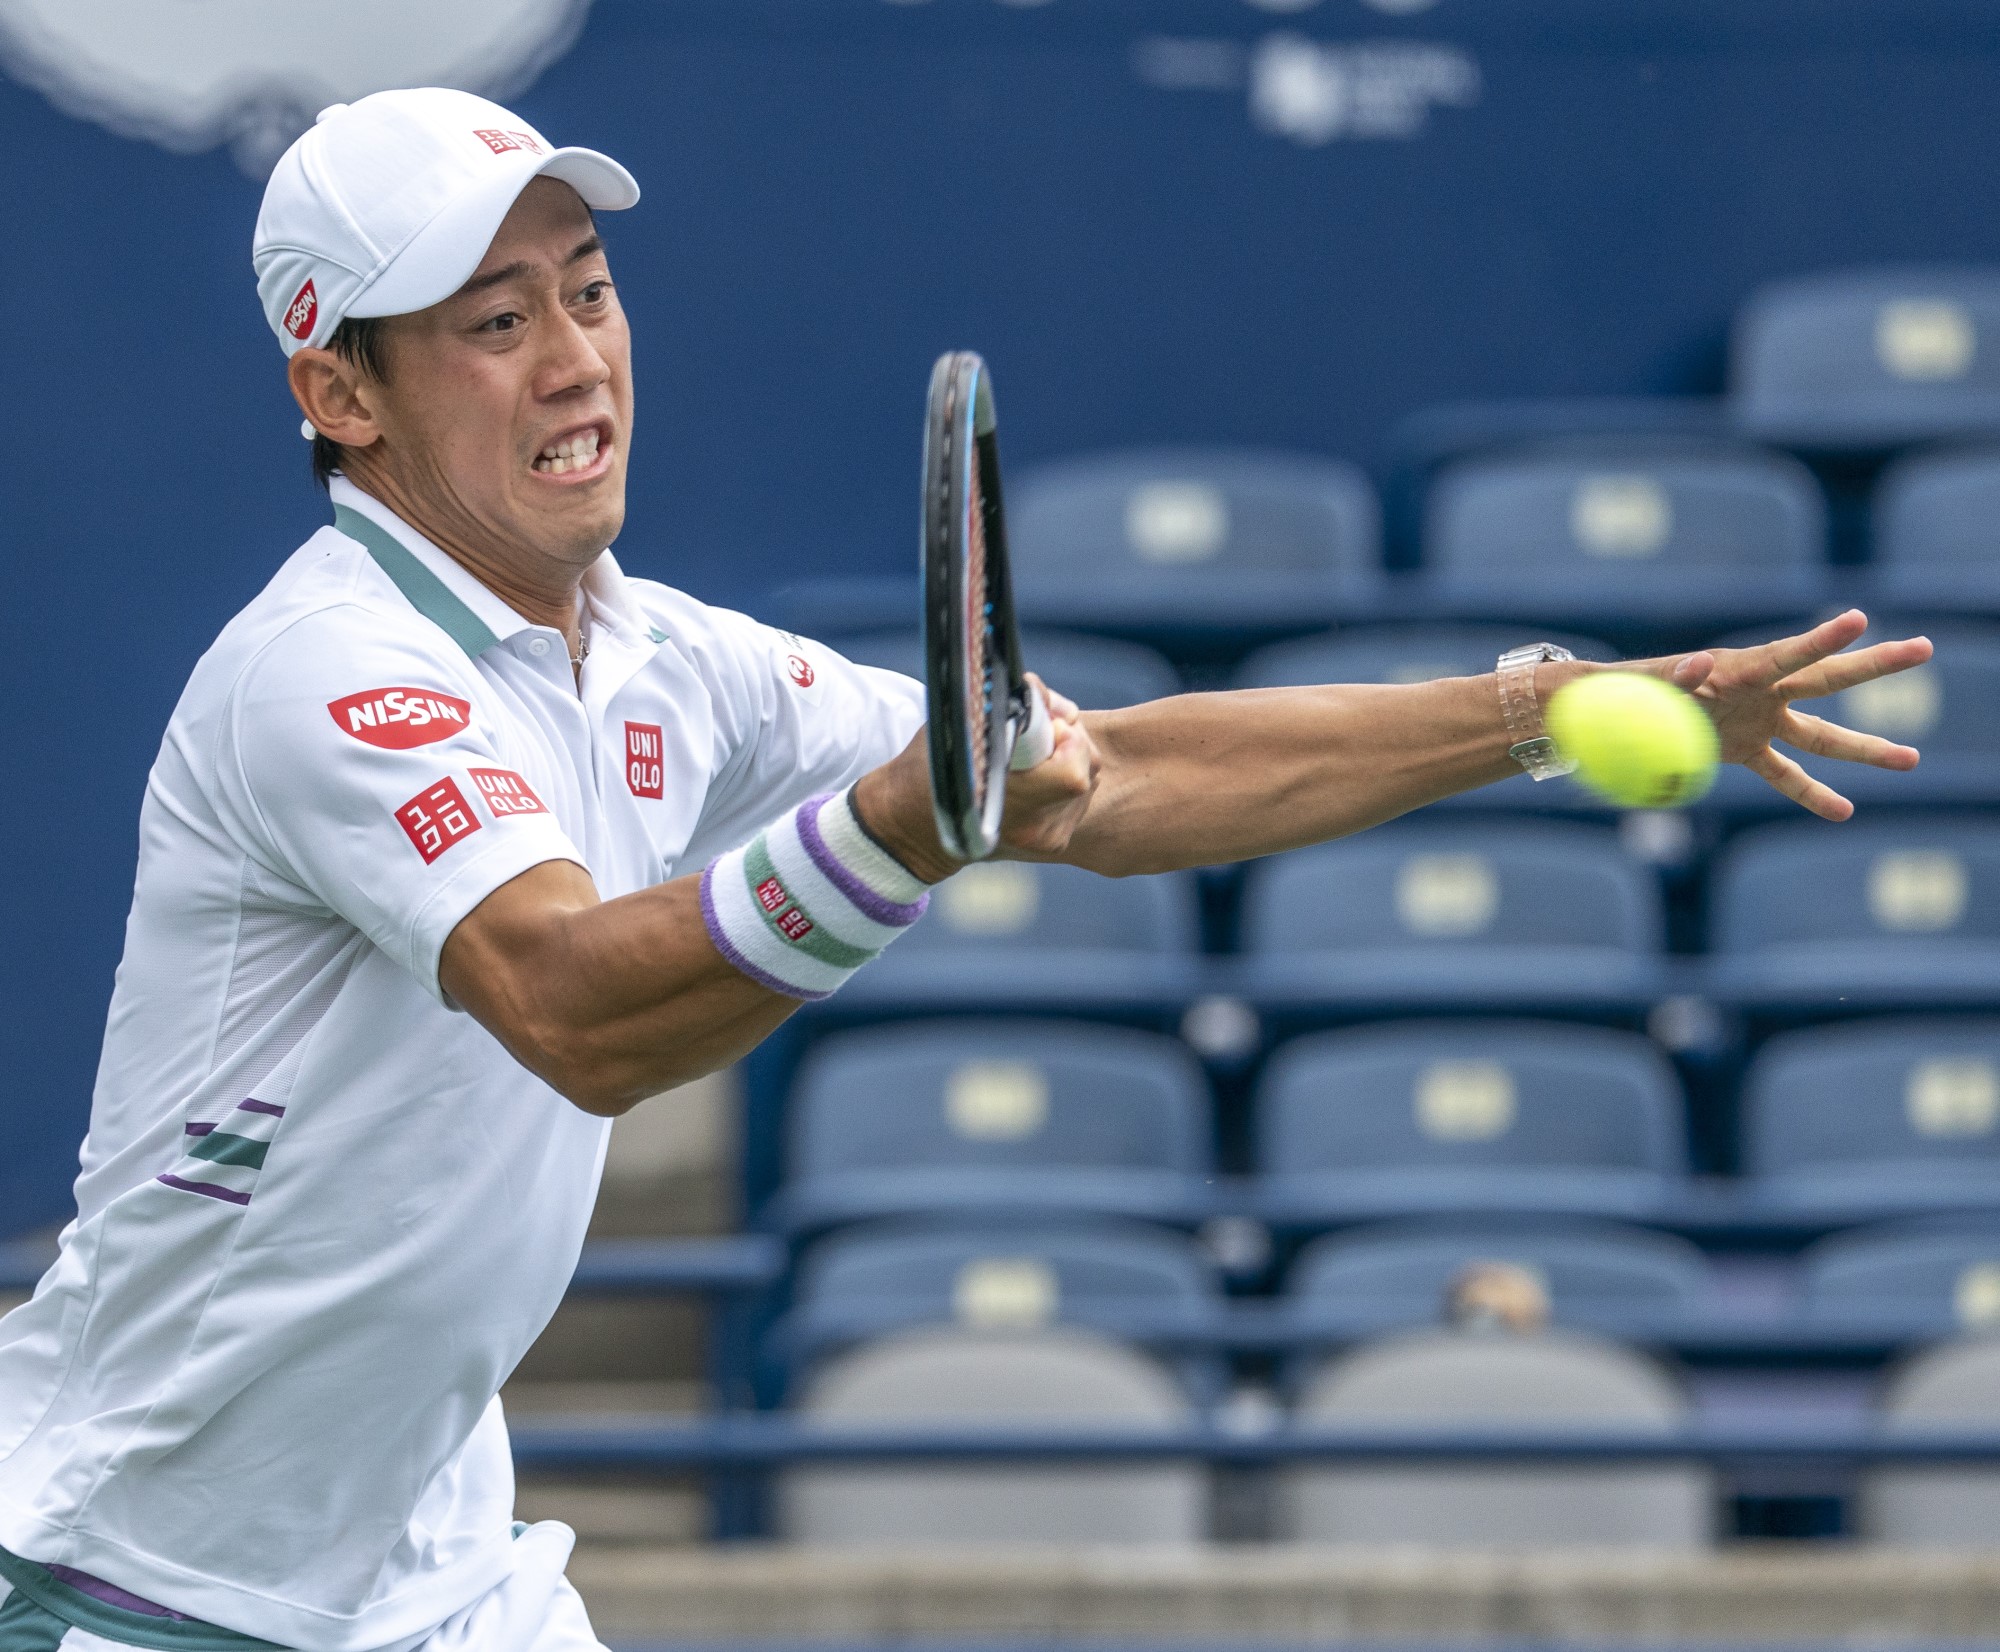 Former World No.4 Kei Nishikori to compete in the National Bank Challenger Tournaments in Calgary and Drummondville